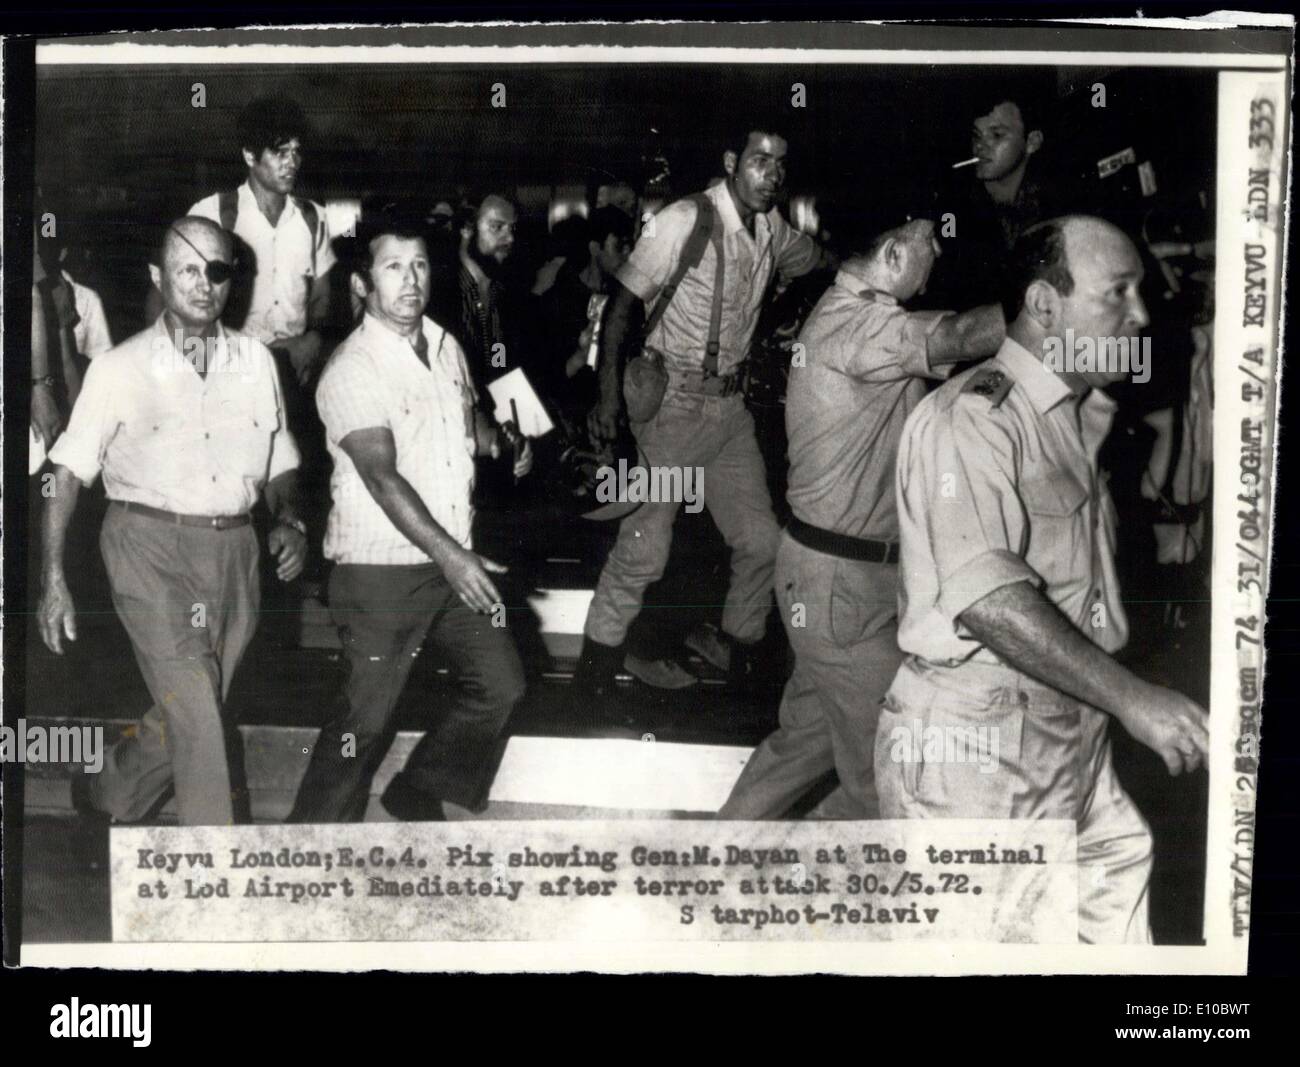 May 31, 1972 - 26 killed in Terrorist attack at tel Aviv Airport: 26 people were killed and many injured when three Japanese terrorists fired automatic rifles and threw hand grenades into the terminal at Lod Airport, Tel Aviv last night. Photo shows The Israel Defence Minister, Moshe Dayan (left), at the terminal at Lod Airport immediately after the terrorist attack. Stock Photo